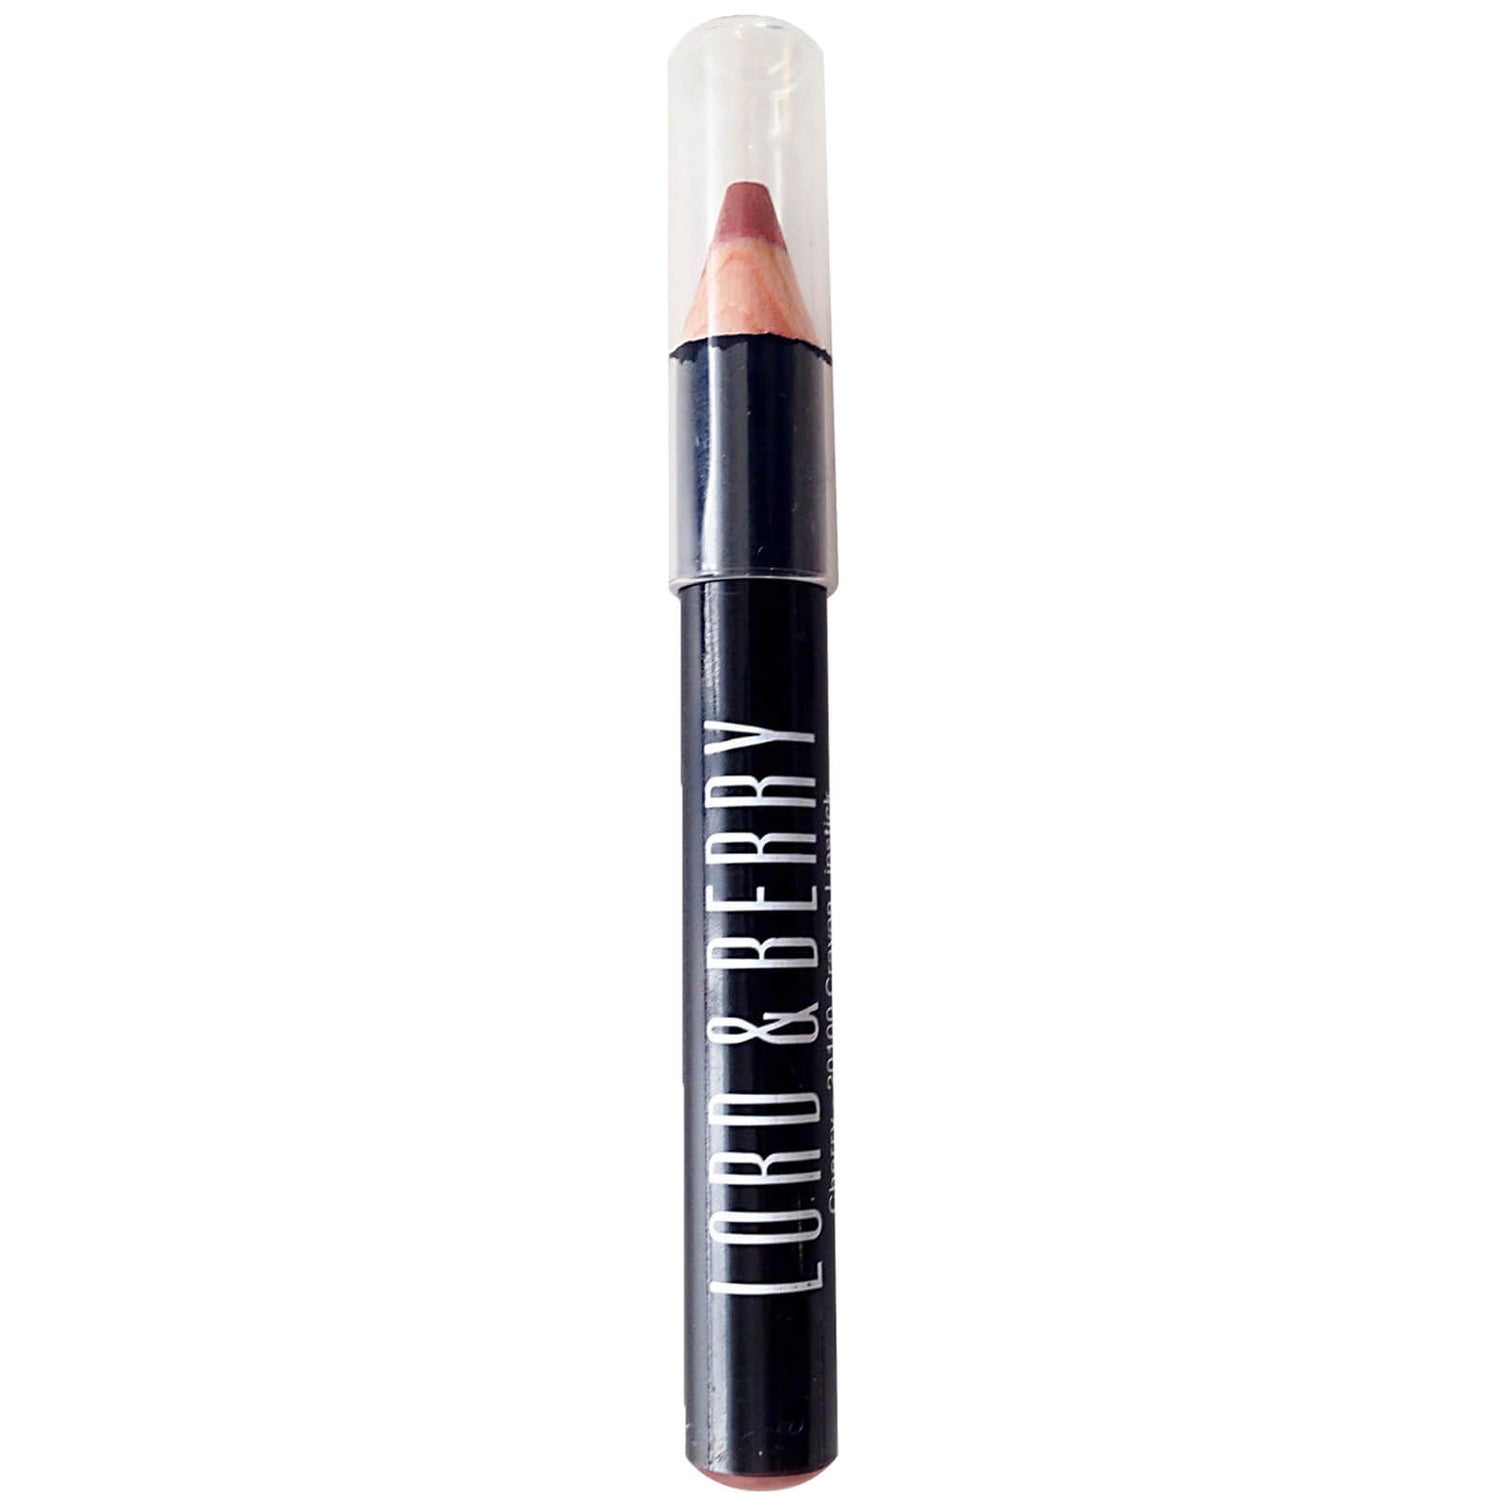 Lord & Berry Maximatte Lipstick Crayon 1.8g (Various Shades)